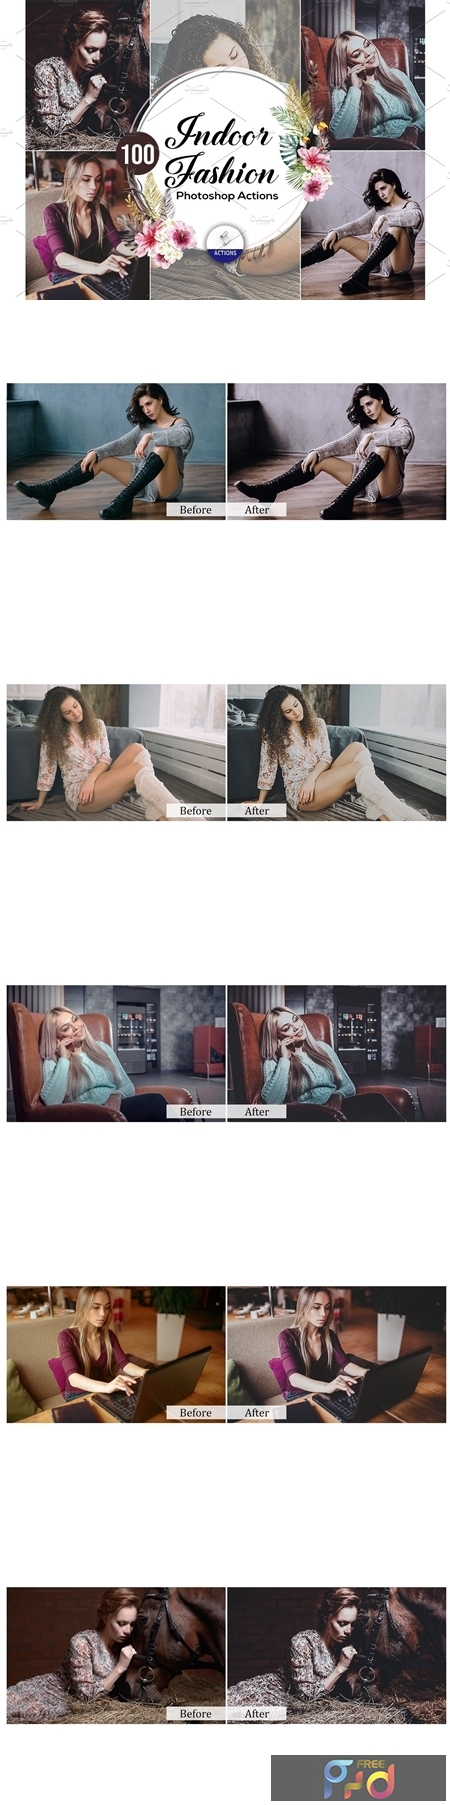 100 Indoor Fashion Photoshop Actions 3937761 1